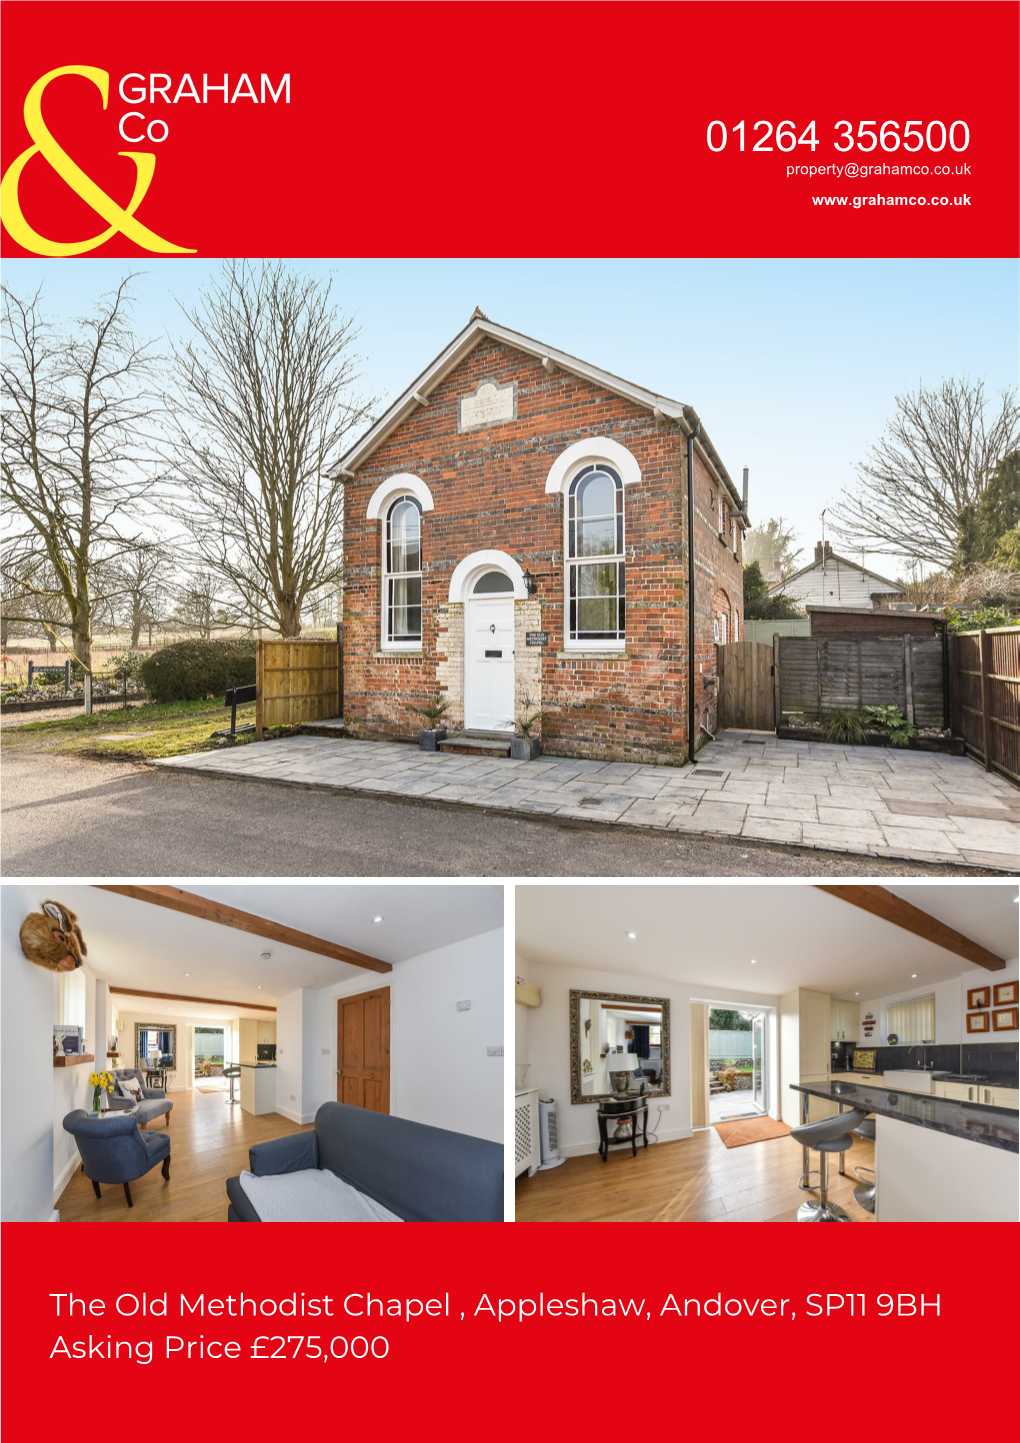 Appleshaw, Andover, SP11 9BH Asking Price £275,000 the Old Methodist Chapel , Appleshaw Andover, Asking Price £275,000